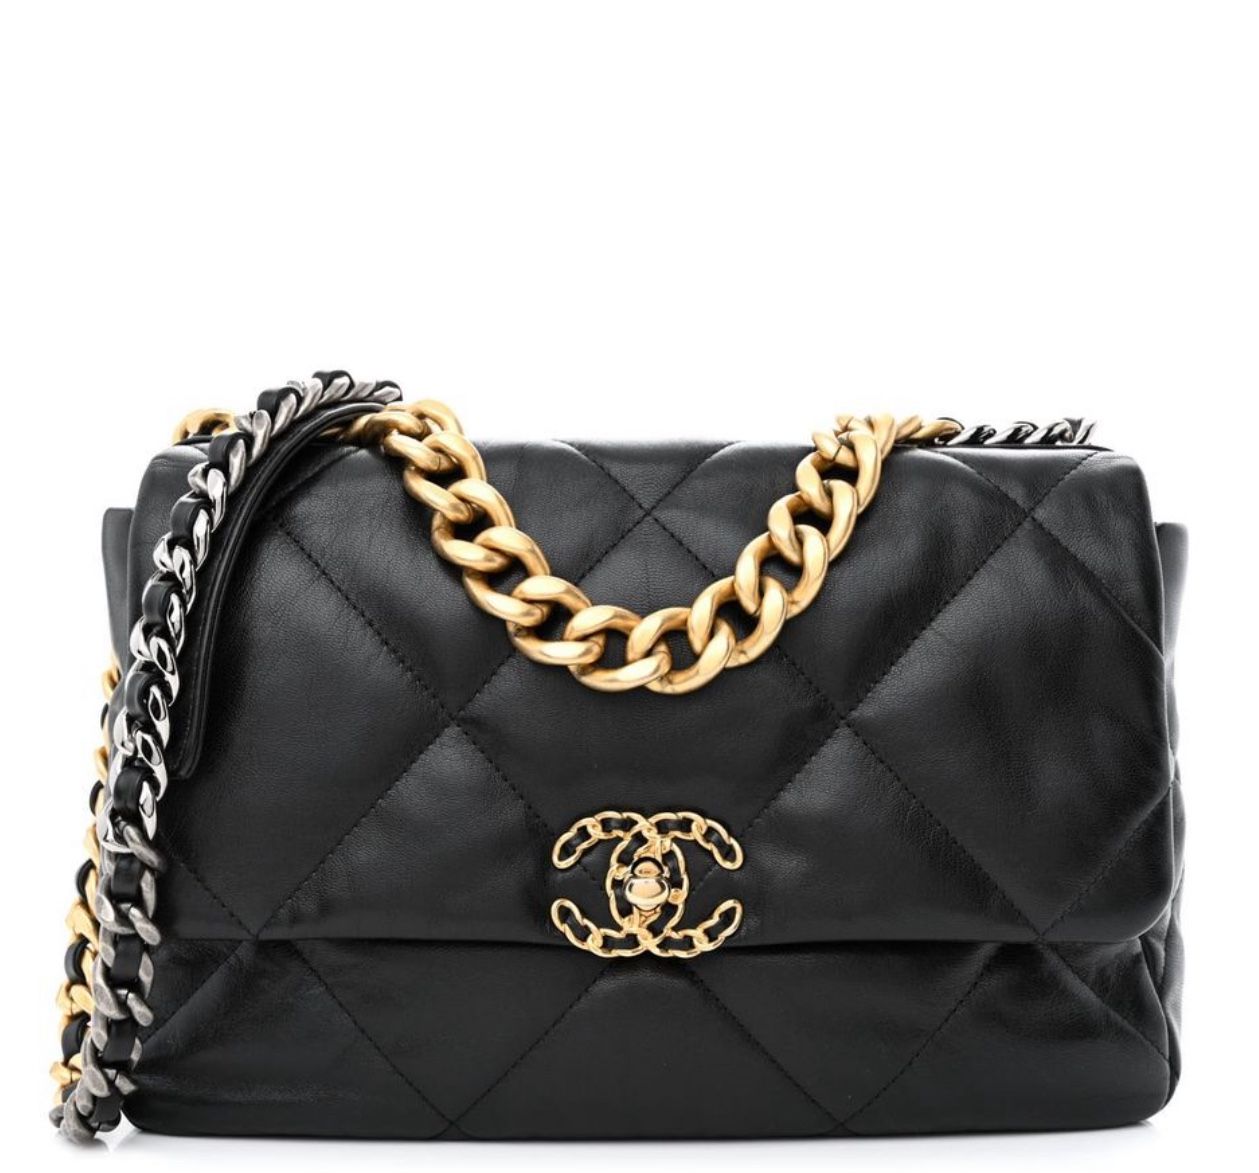 Chanel 19 Flap Bag, Quilted Leather